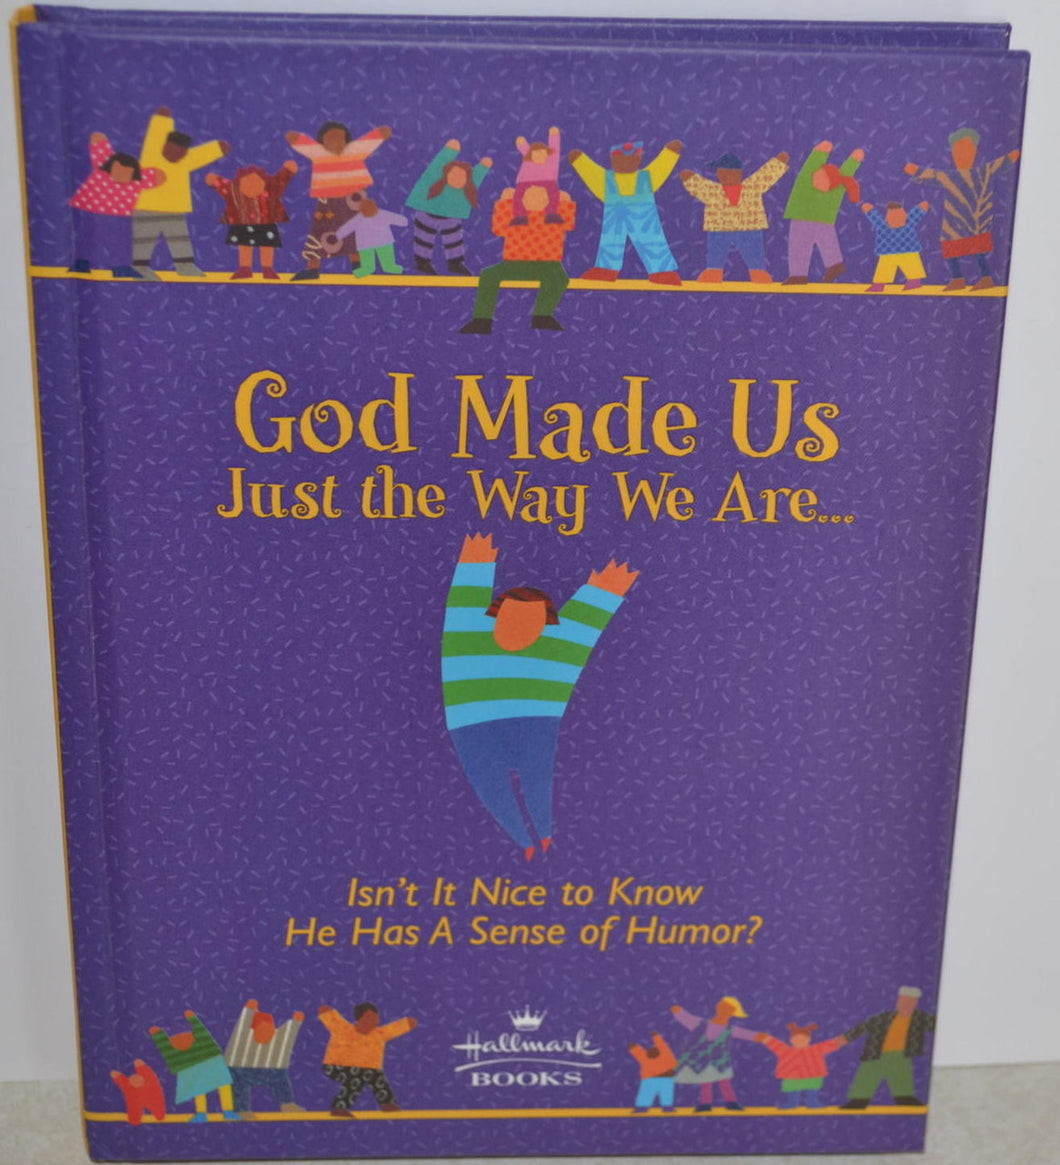 God Made Me Just The Way We Areby Hallmark Books (pre-owned)